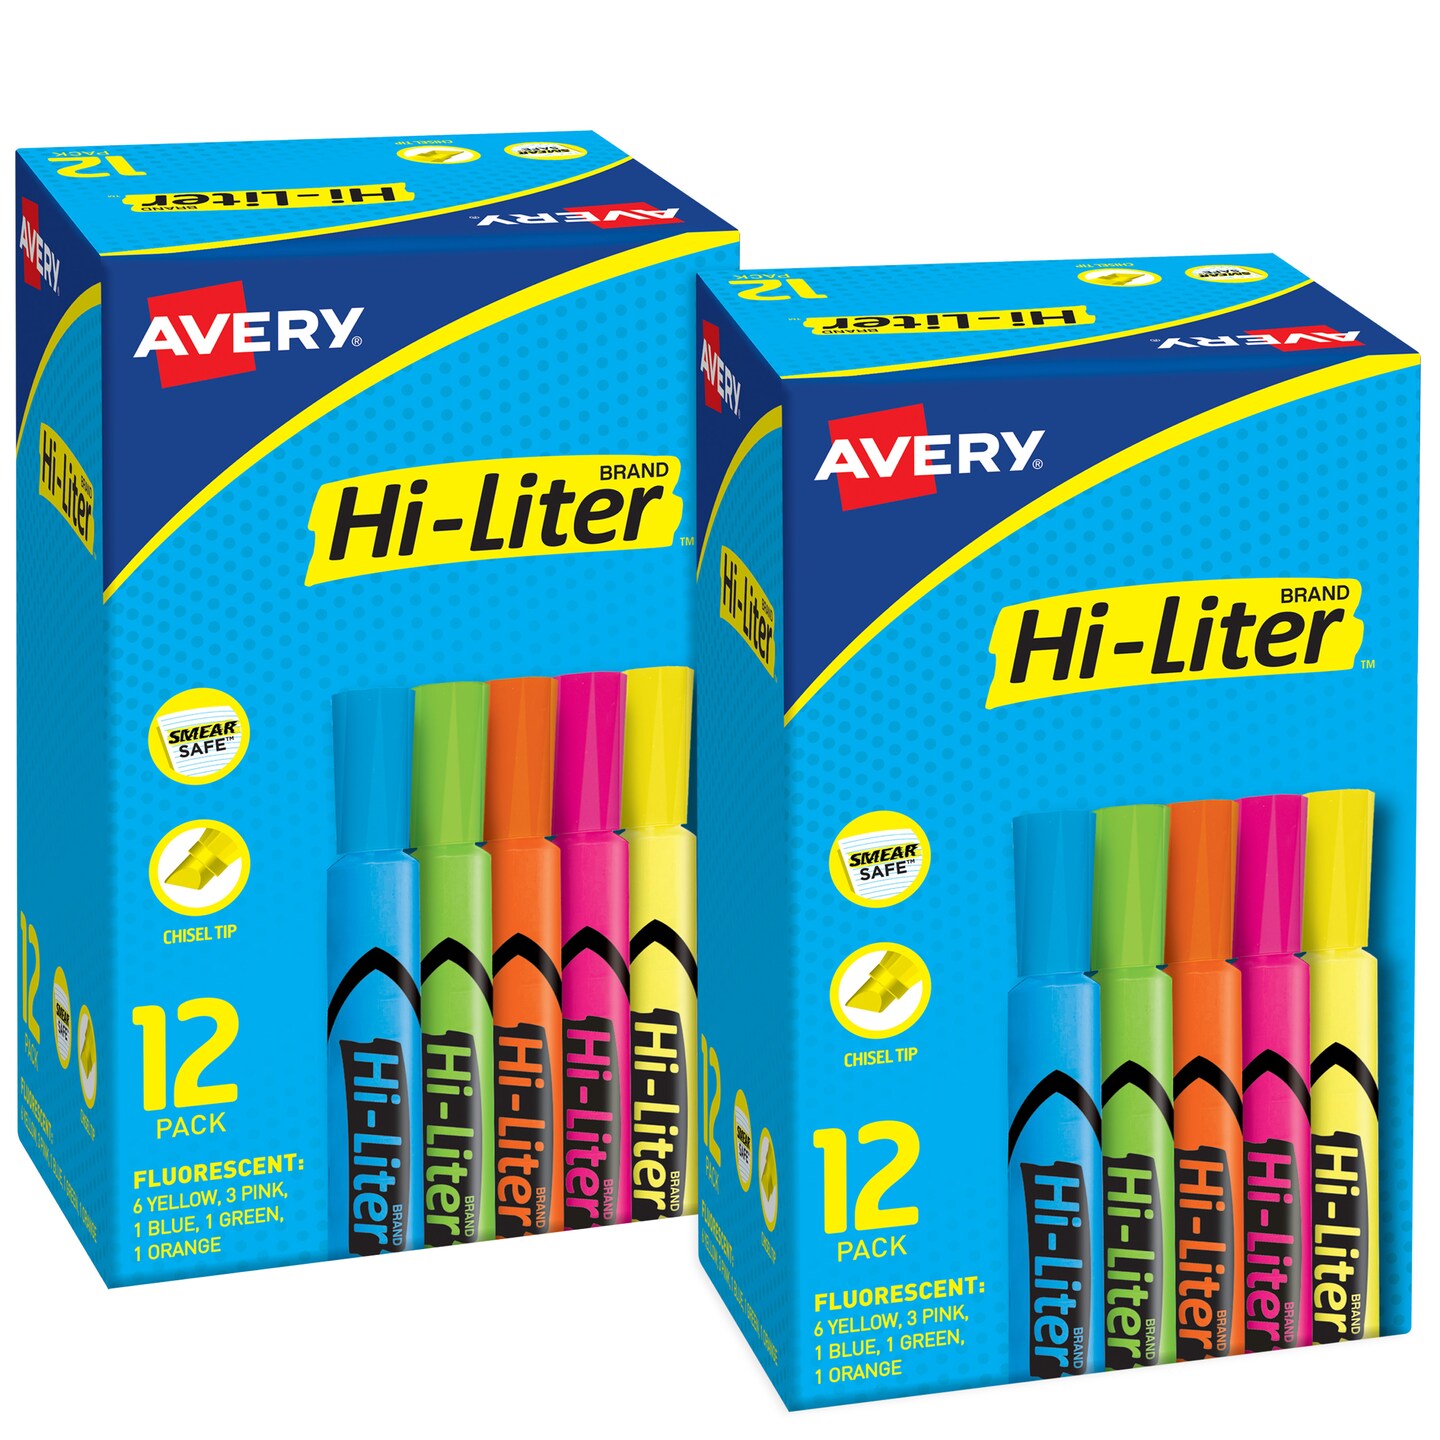 Avery Hi-Liter Desk-Style Highlighters, Chisel Tip, 12 Highlighters,  Assorted Colors, 2 Packs (25601)